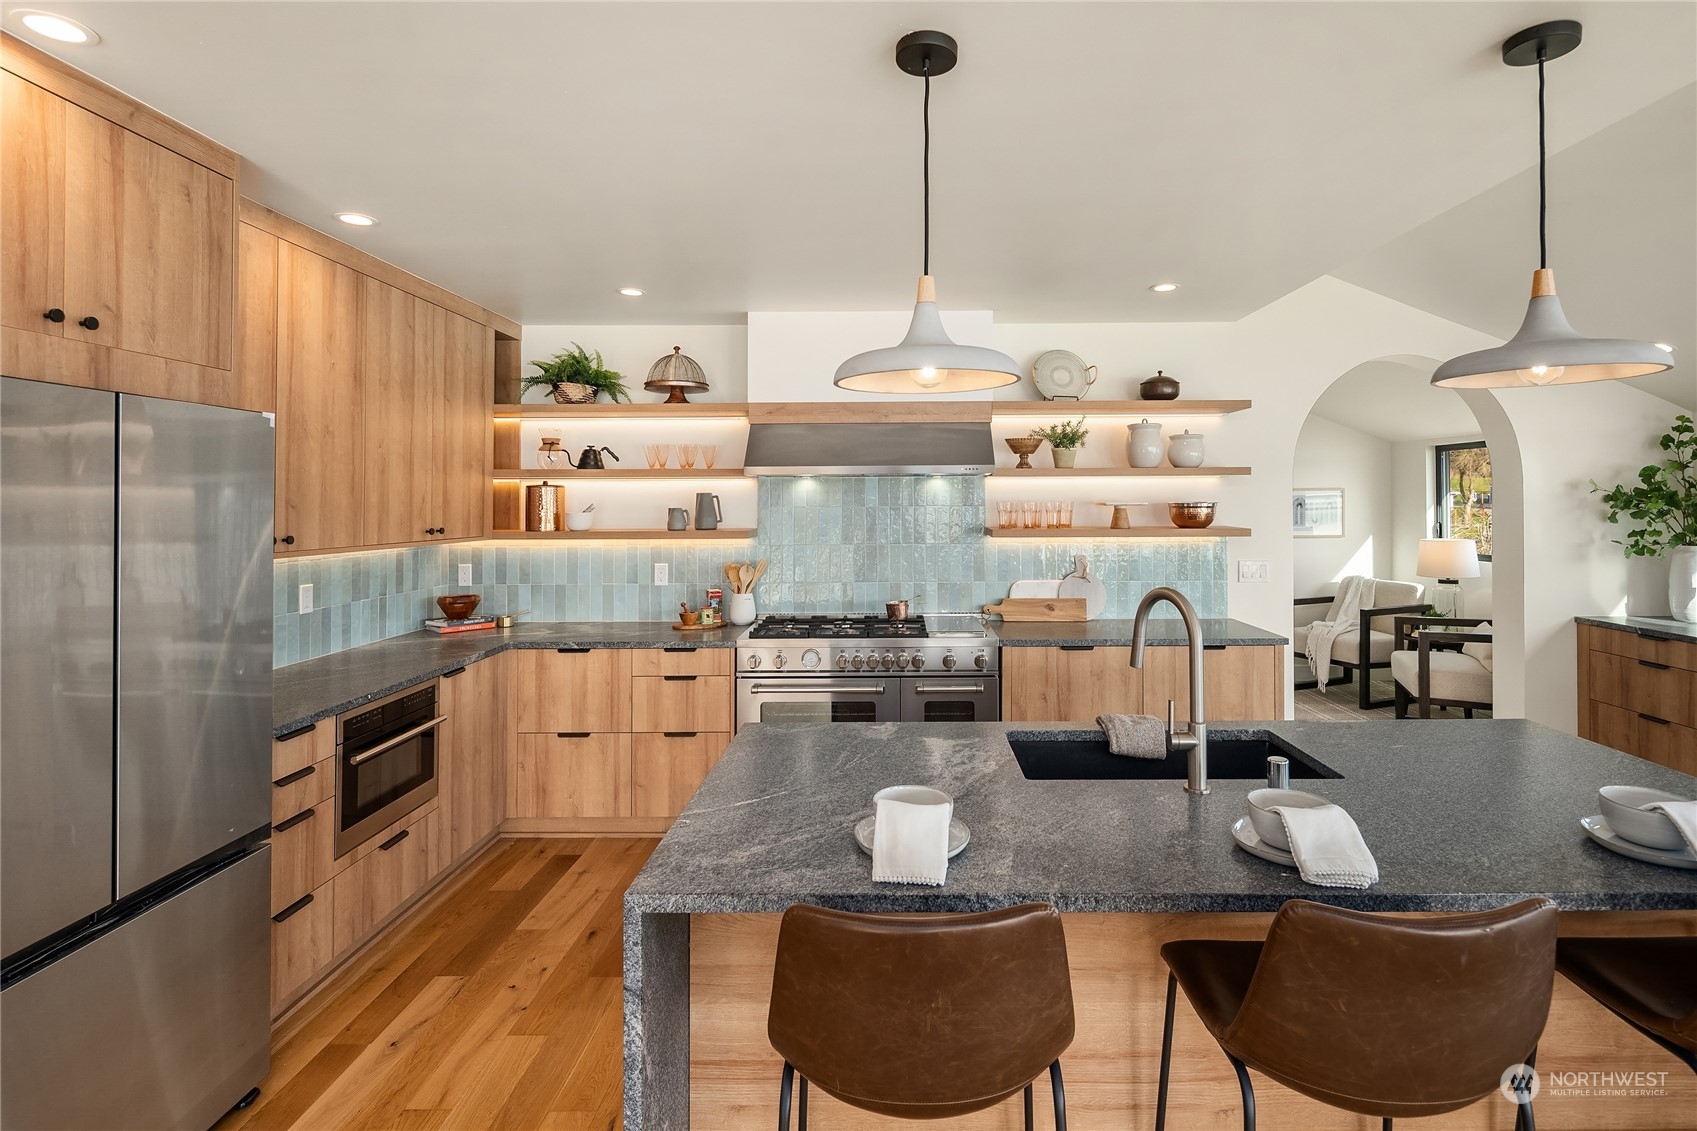 a kitchen with stainless steel appliances kitchen island granite countertop a table chairs stove and refrigerator